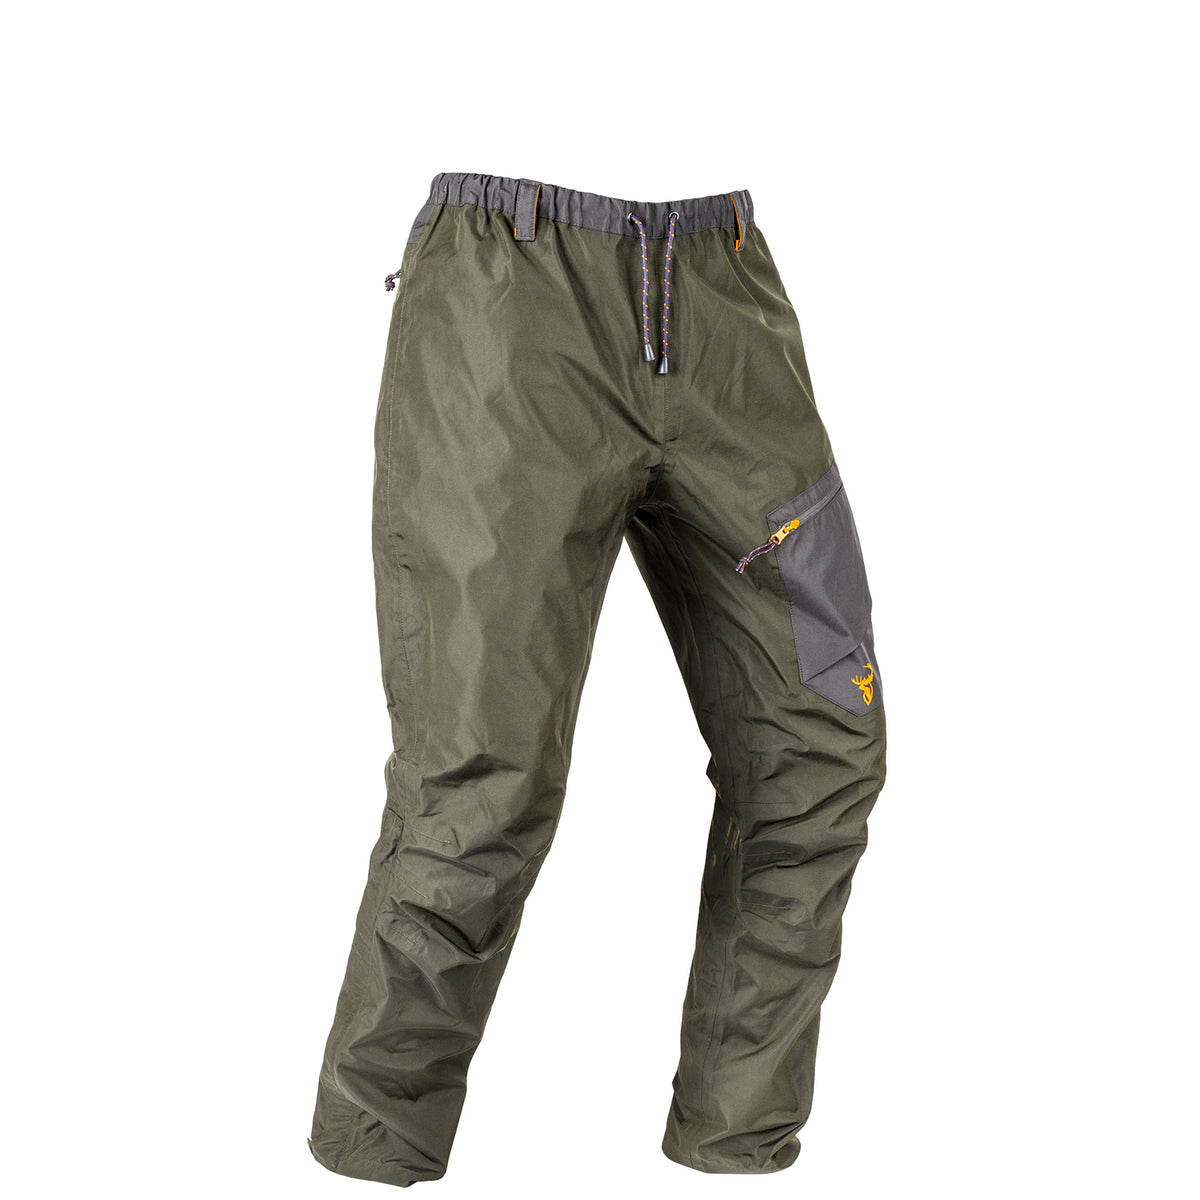 Oxide Trouser, Suited For Anything